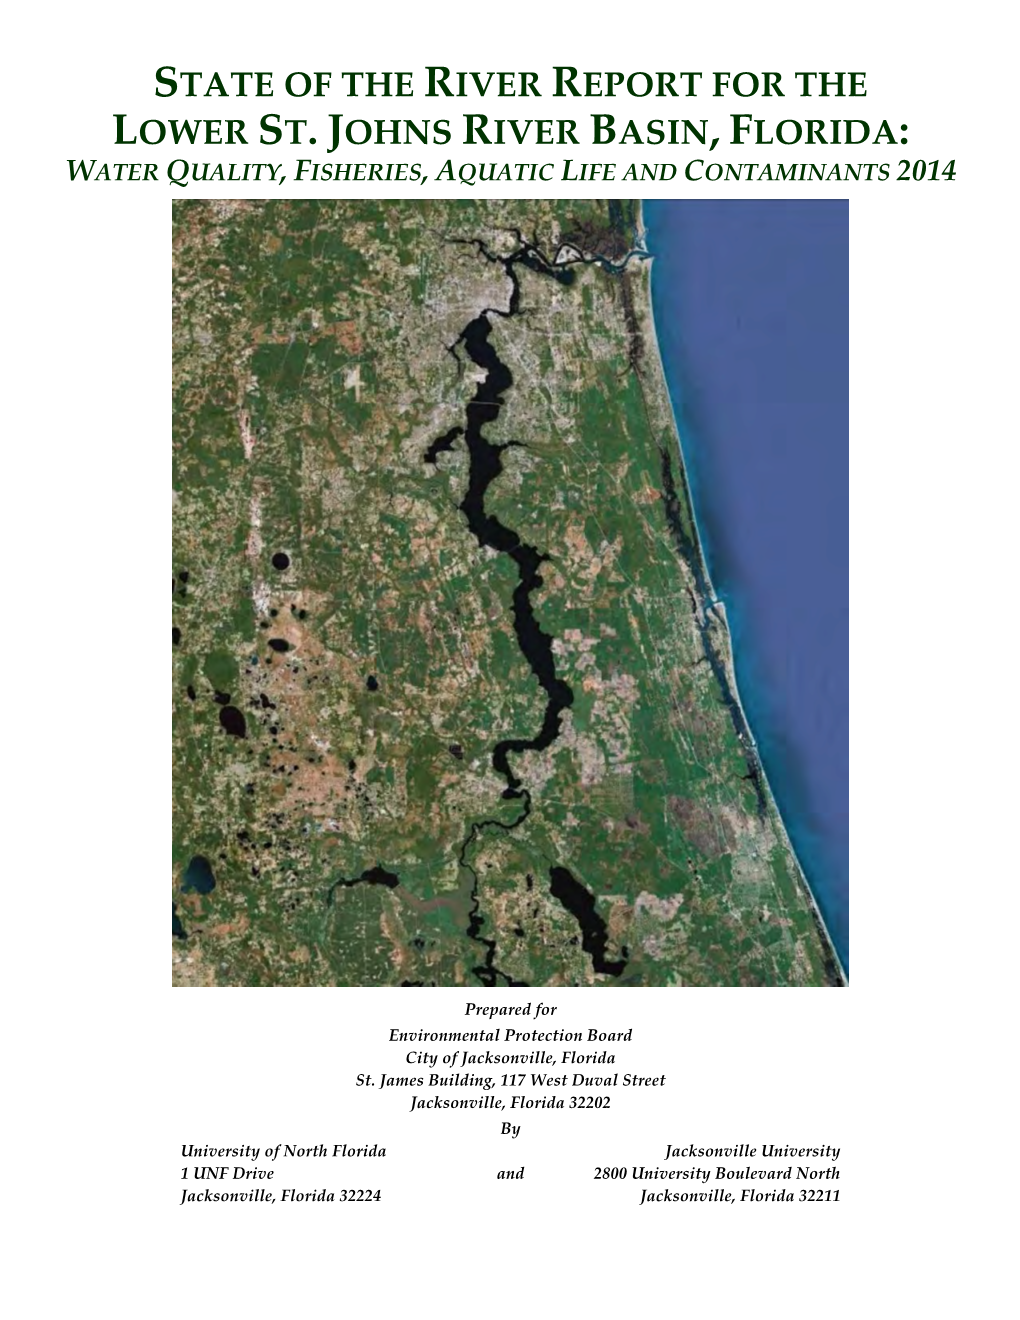 State of the River Report for the Lower St. Johns River Basin, Florida: Water Quality, Fisheries, Aquatic Life and Contaminants 2014